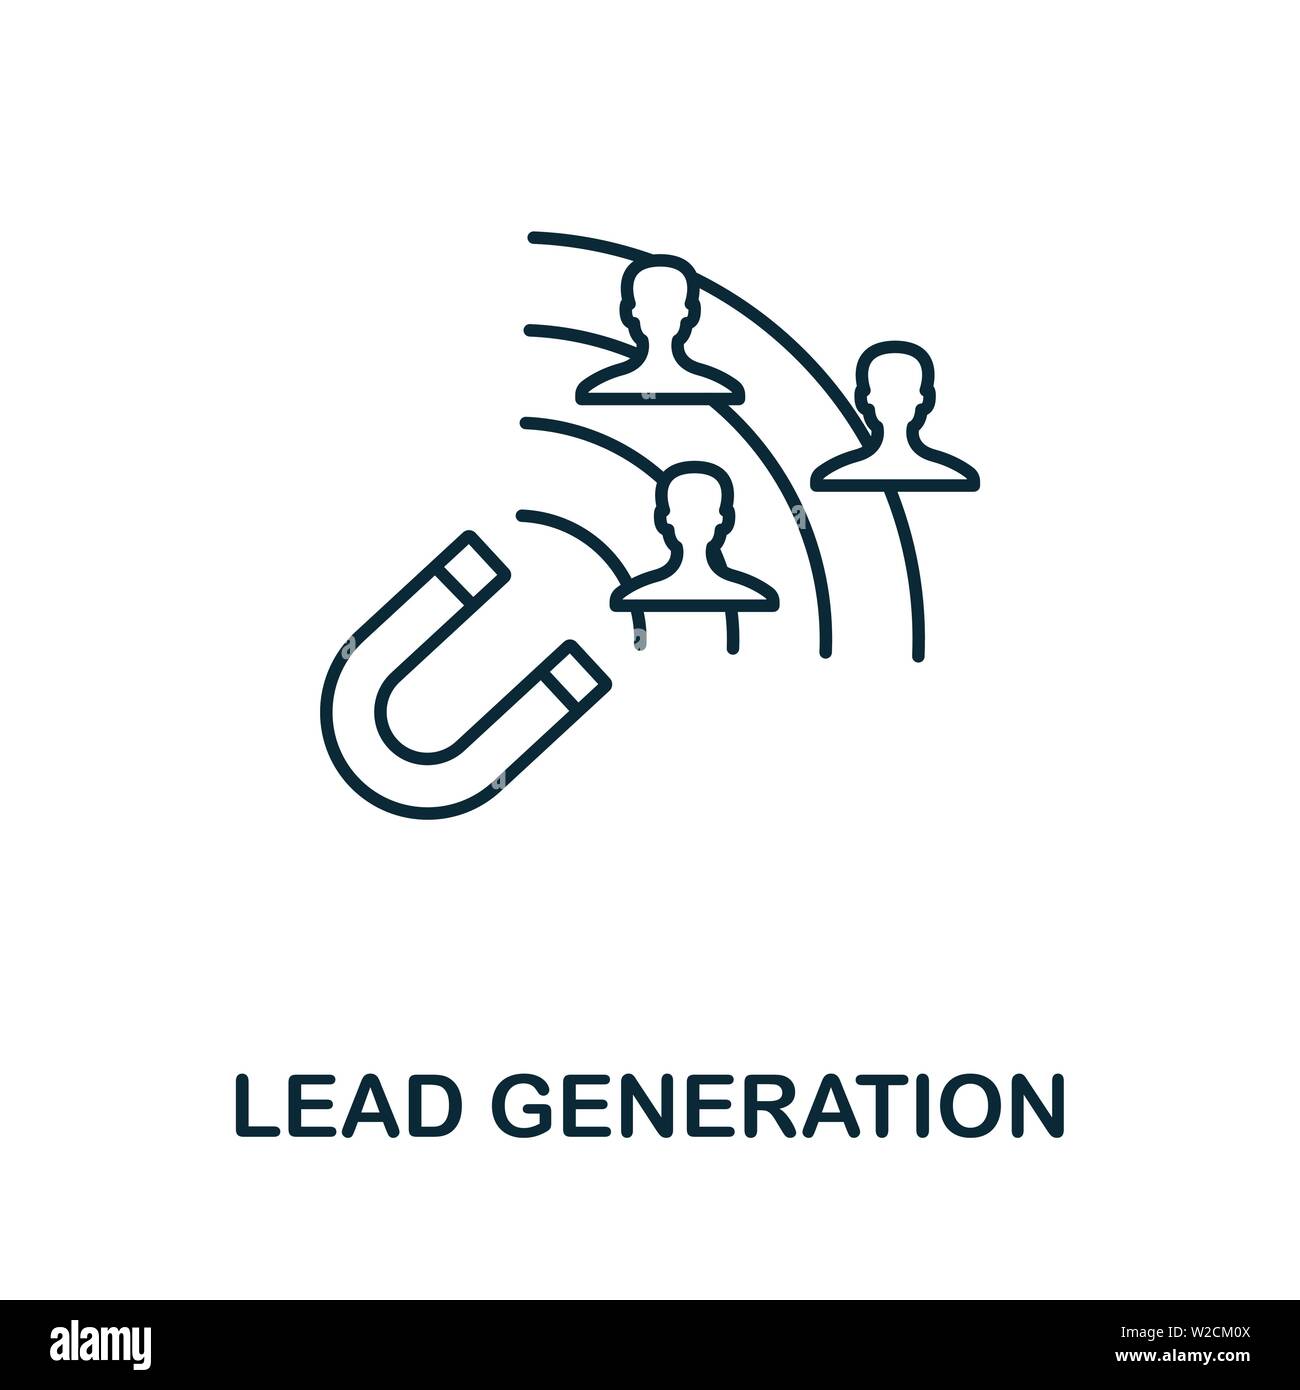 Lead Generation outline icon. Thin line concept element from content icons collection. Creative Lead Generation icon for mobile apps and web usage Stock Vector